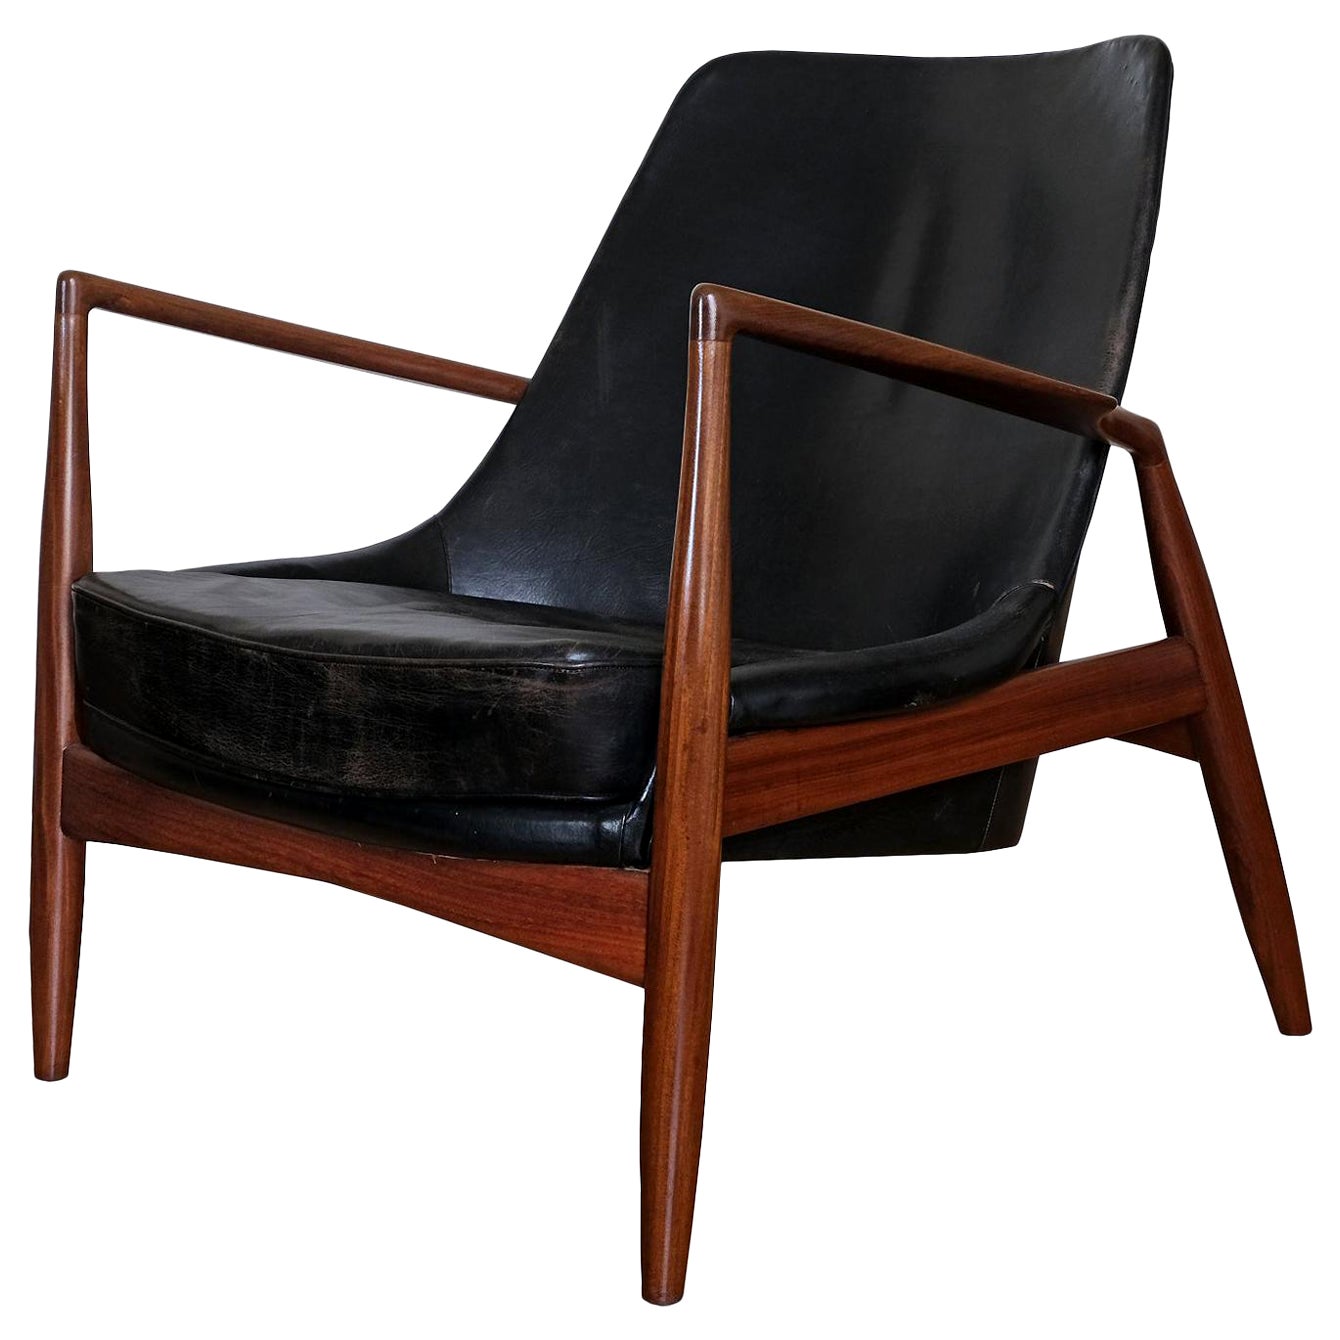 Ib Kofod-Larsen, Lounge Armchair "Seal", Produced by OPE, Sweden, 1950s For Sale